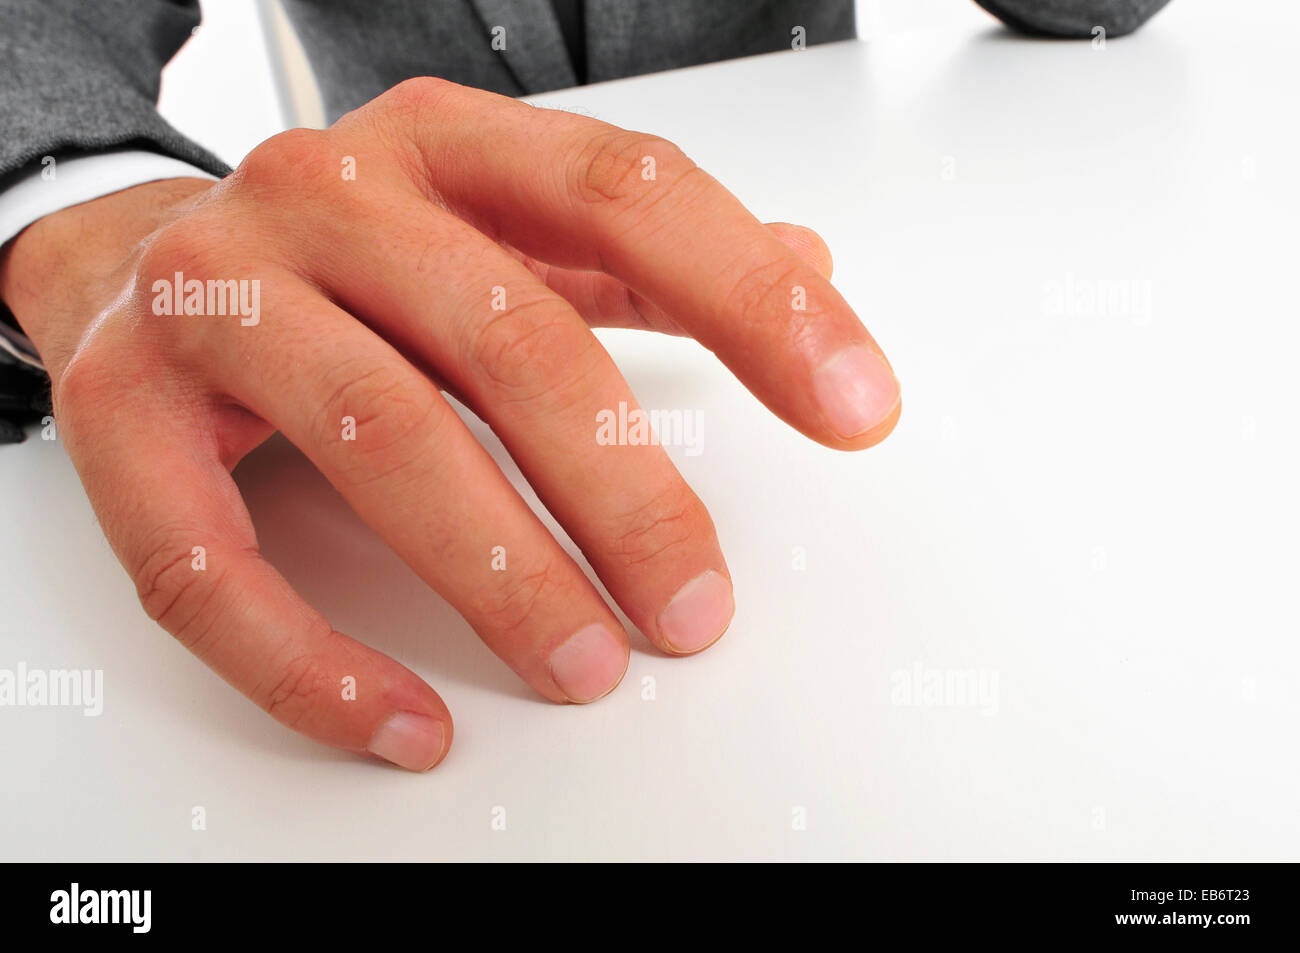 man wearing a suit sitting drumming his fingers on the desk Stock Photo